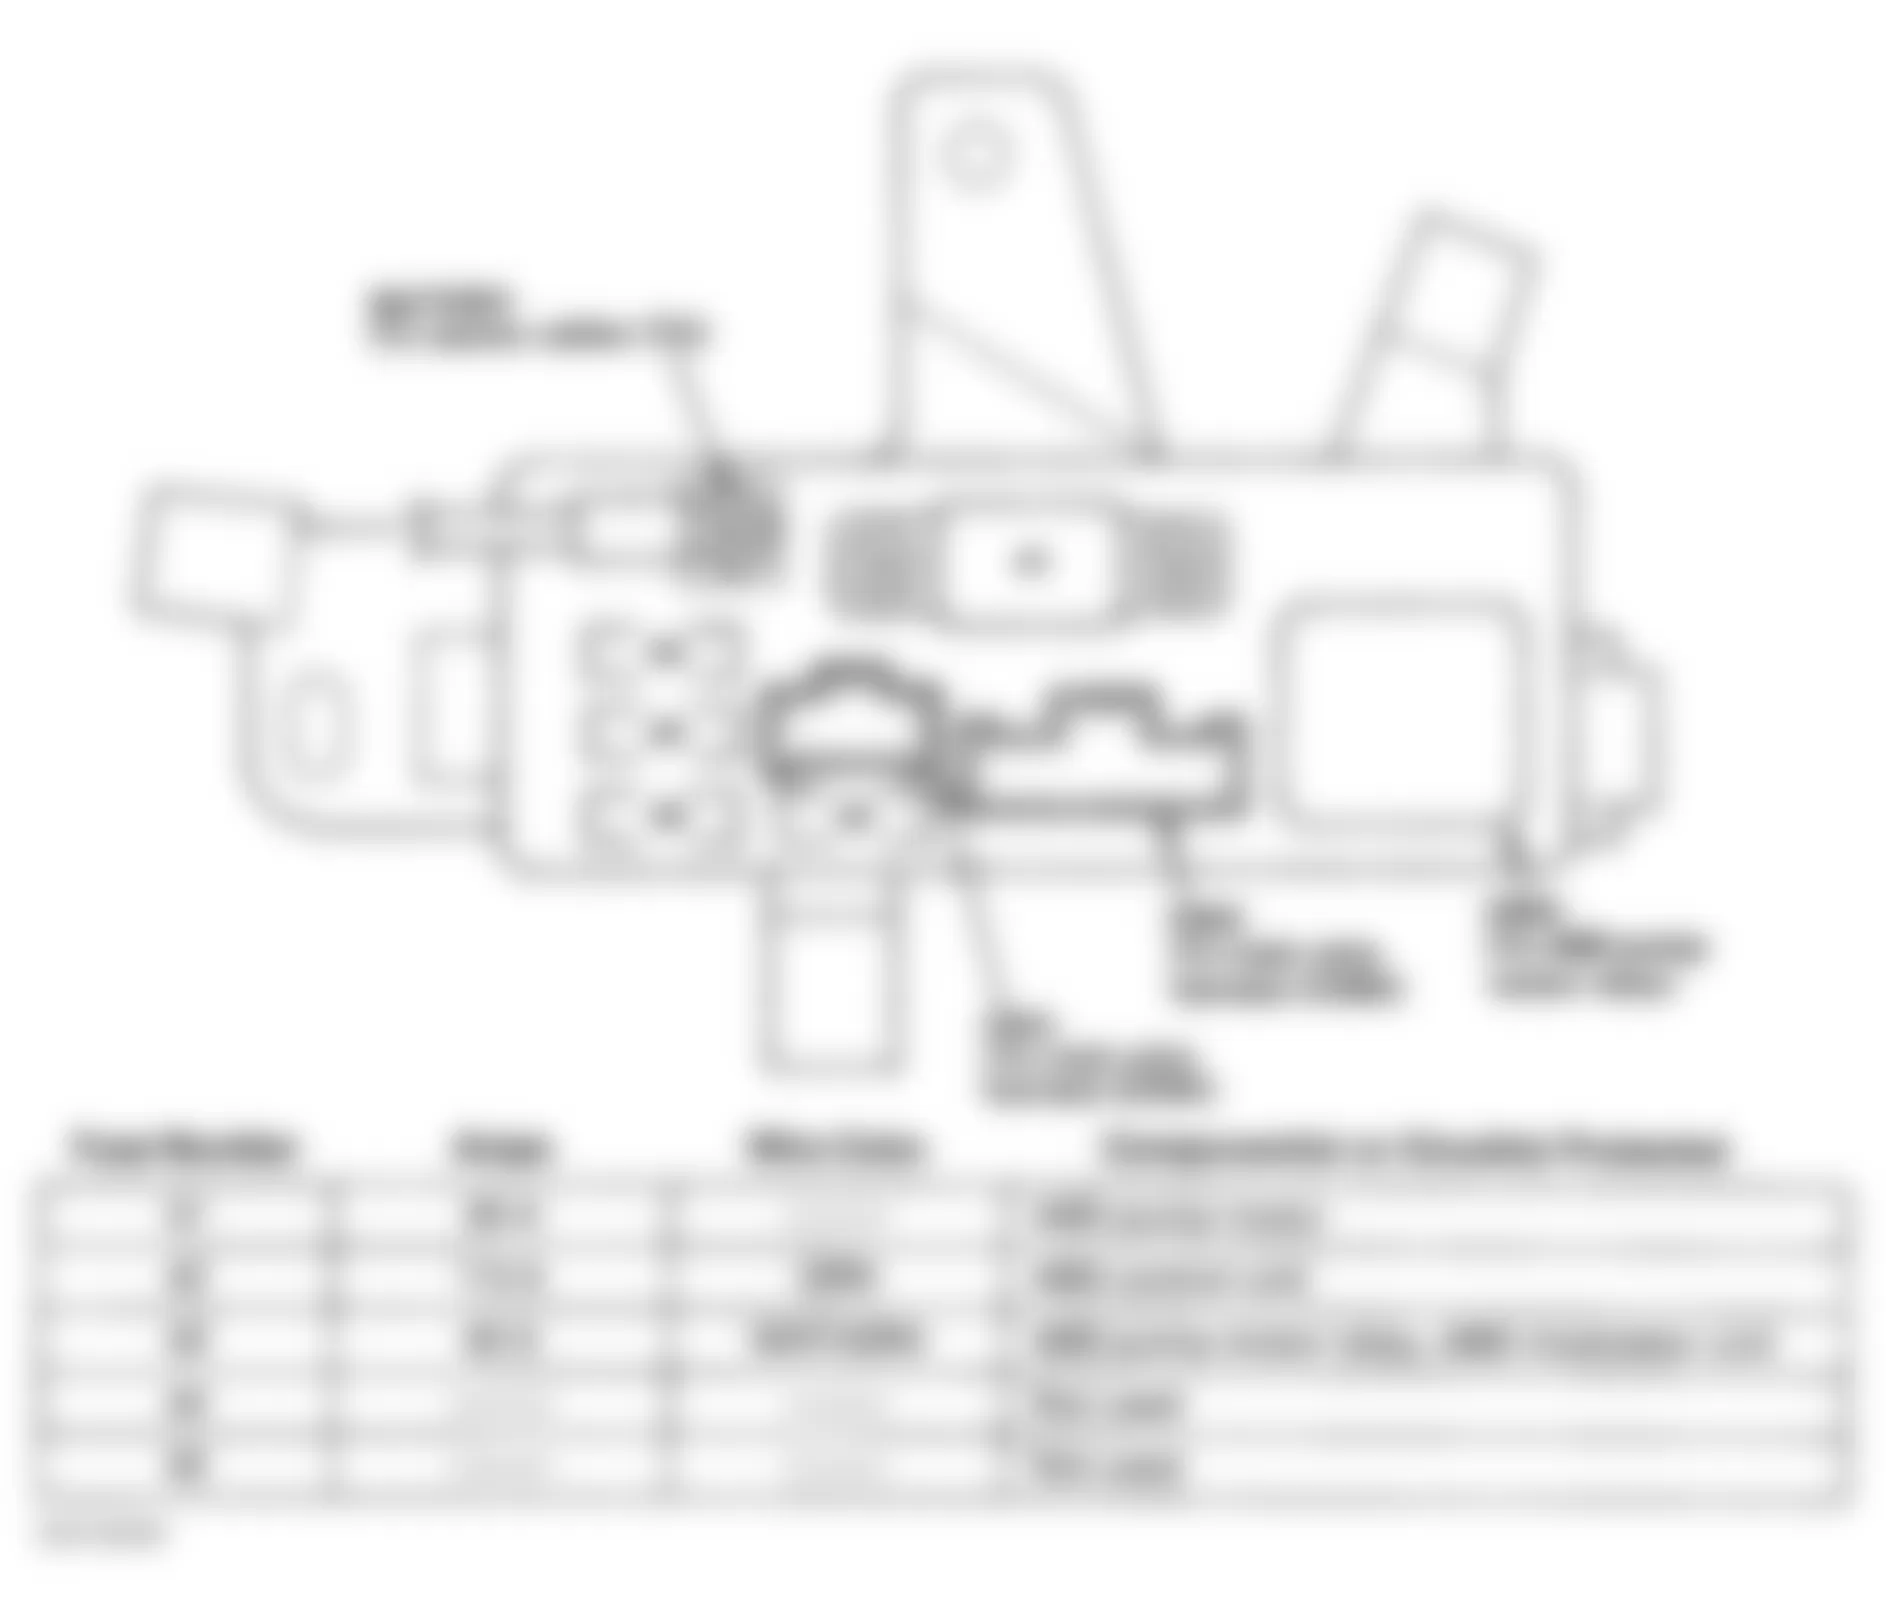 Isuzu Oasis S 1997 - Component Locations -  Identifying Under-Hood ABS Fuse/Relay Box